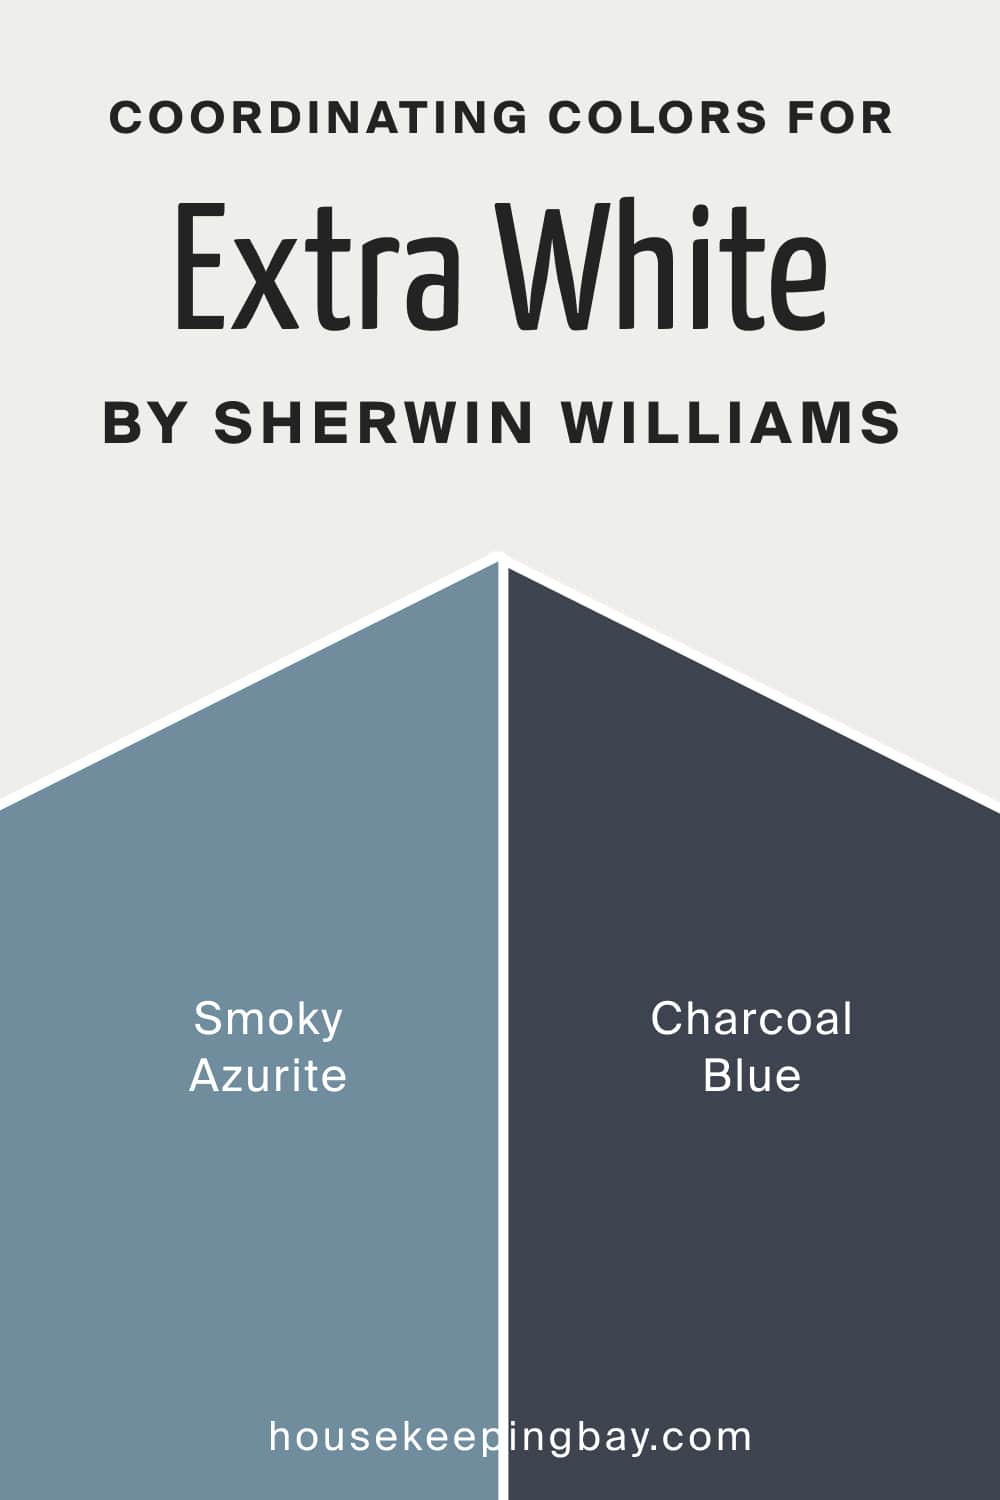 Coordinating Colors for Extra White SW 7006 by Sherwin Williams